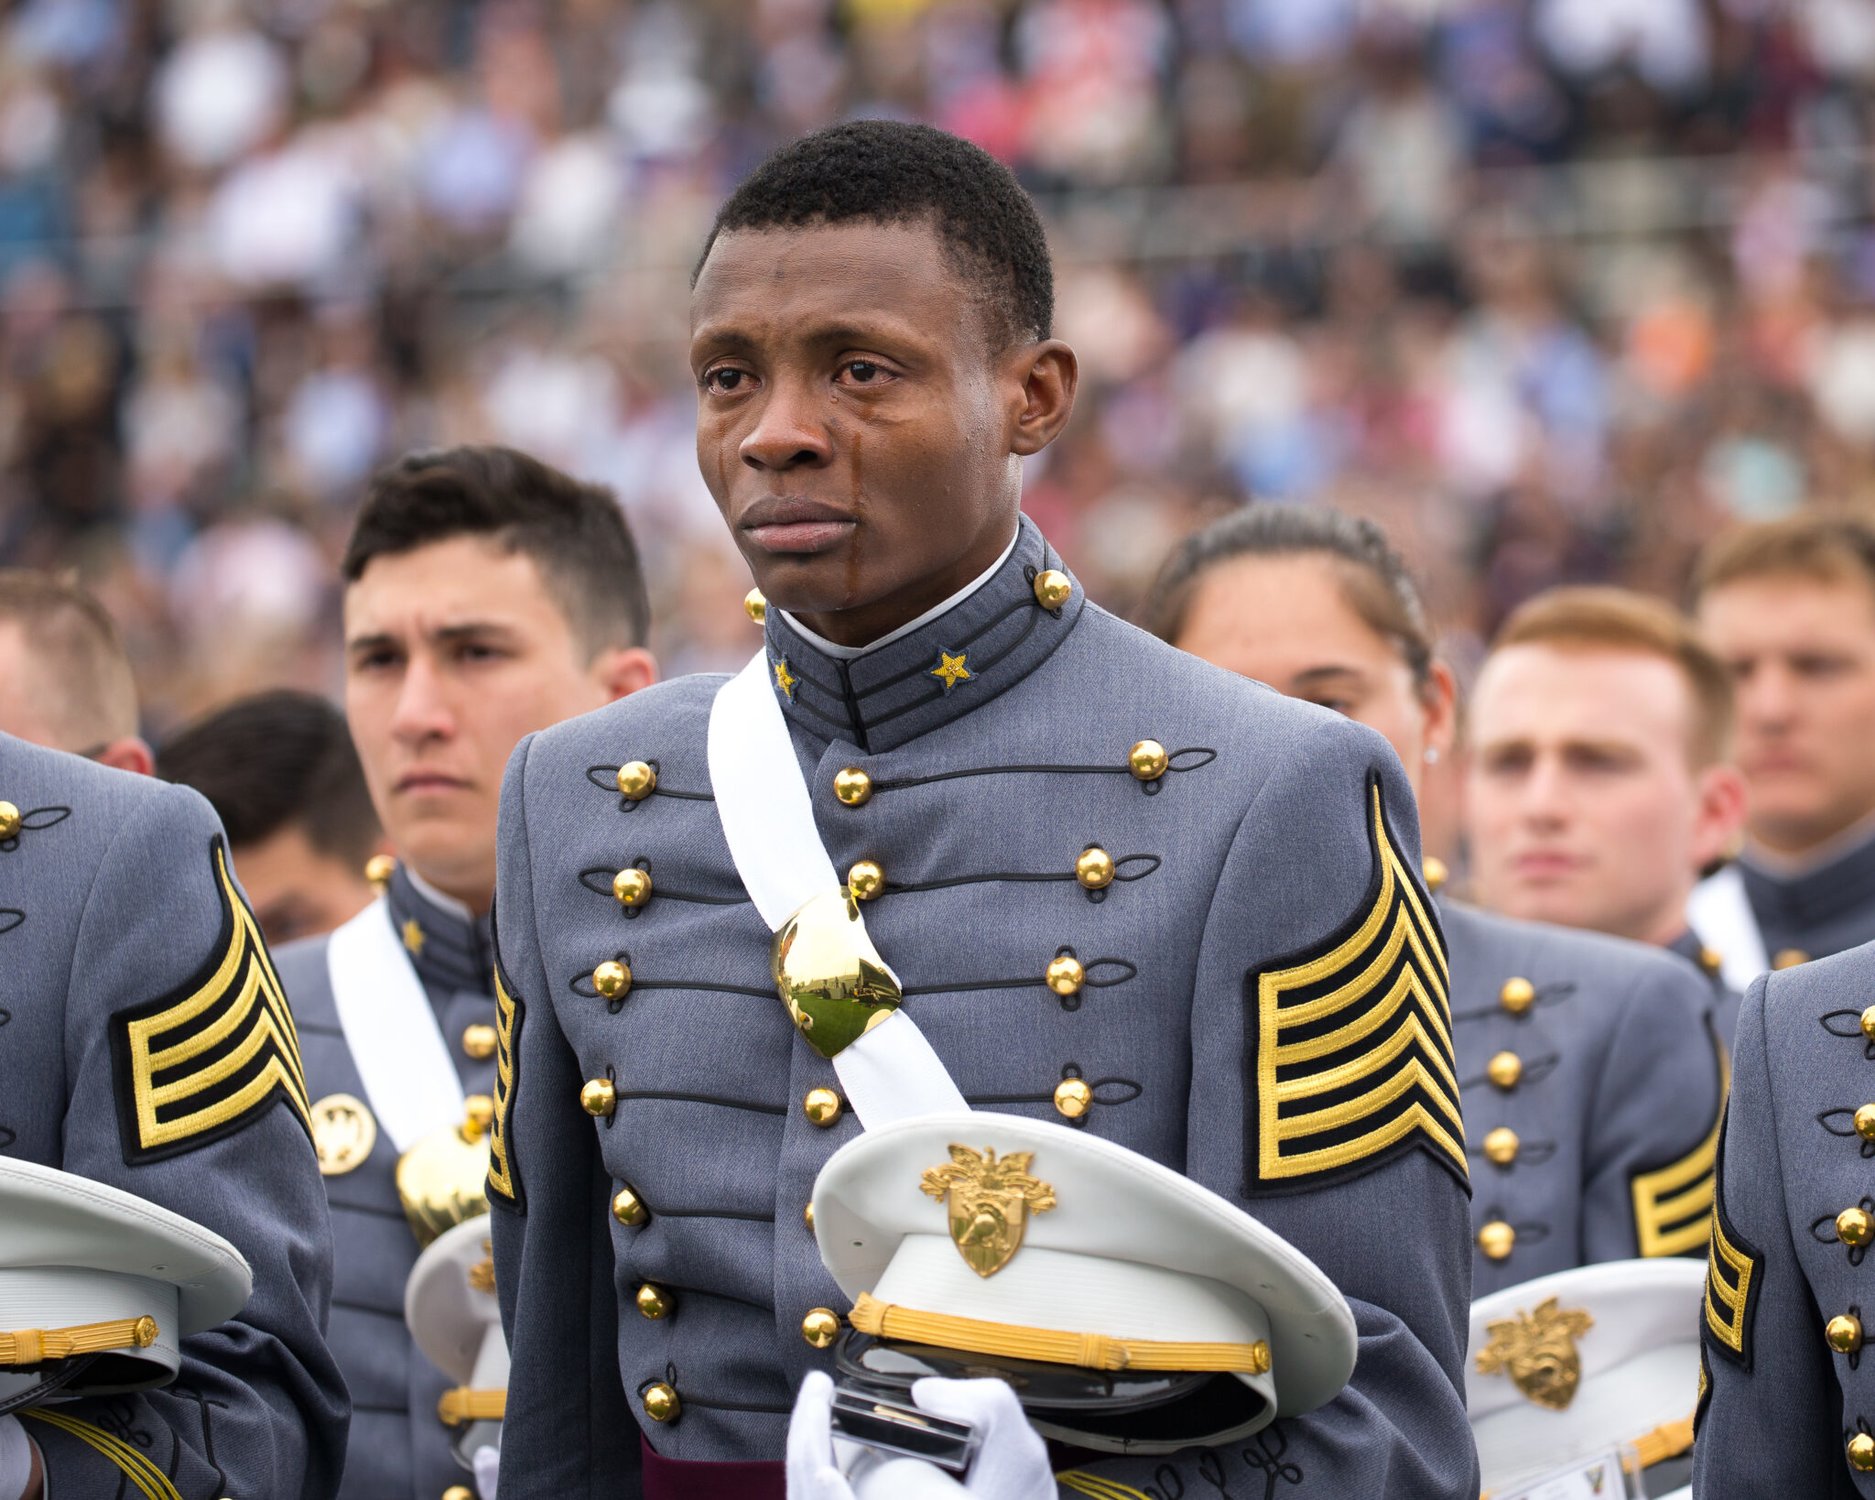 Cadet Alix Idrache sheds tears of joy during the commencement for the US Military Academy’s Class of 2016 at Michie Stadium in West Point. Approximately 78% of the 953 cadets who entered West Point in summer 2012 graduated. The class included 151 women, 77 Hispanics, 71 Asian/Pacific Islanders, 69 African Americans, and 12 Native Americans; and 25 combat veterans, 24 male, one female. US Army photo by Staff Sgt. Vito T. Bryant.